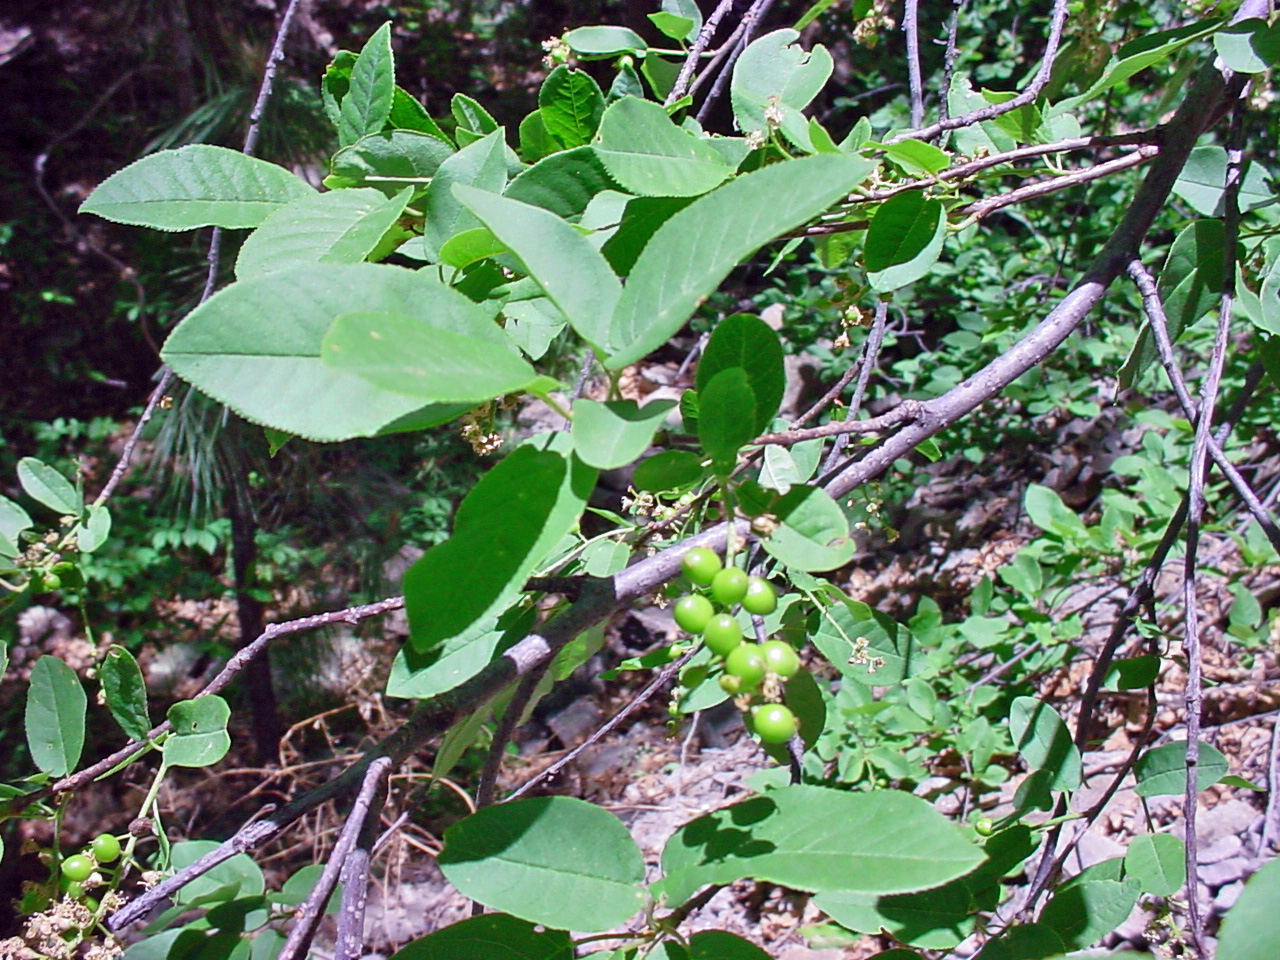 Foliage and green fruits